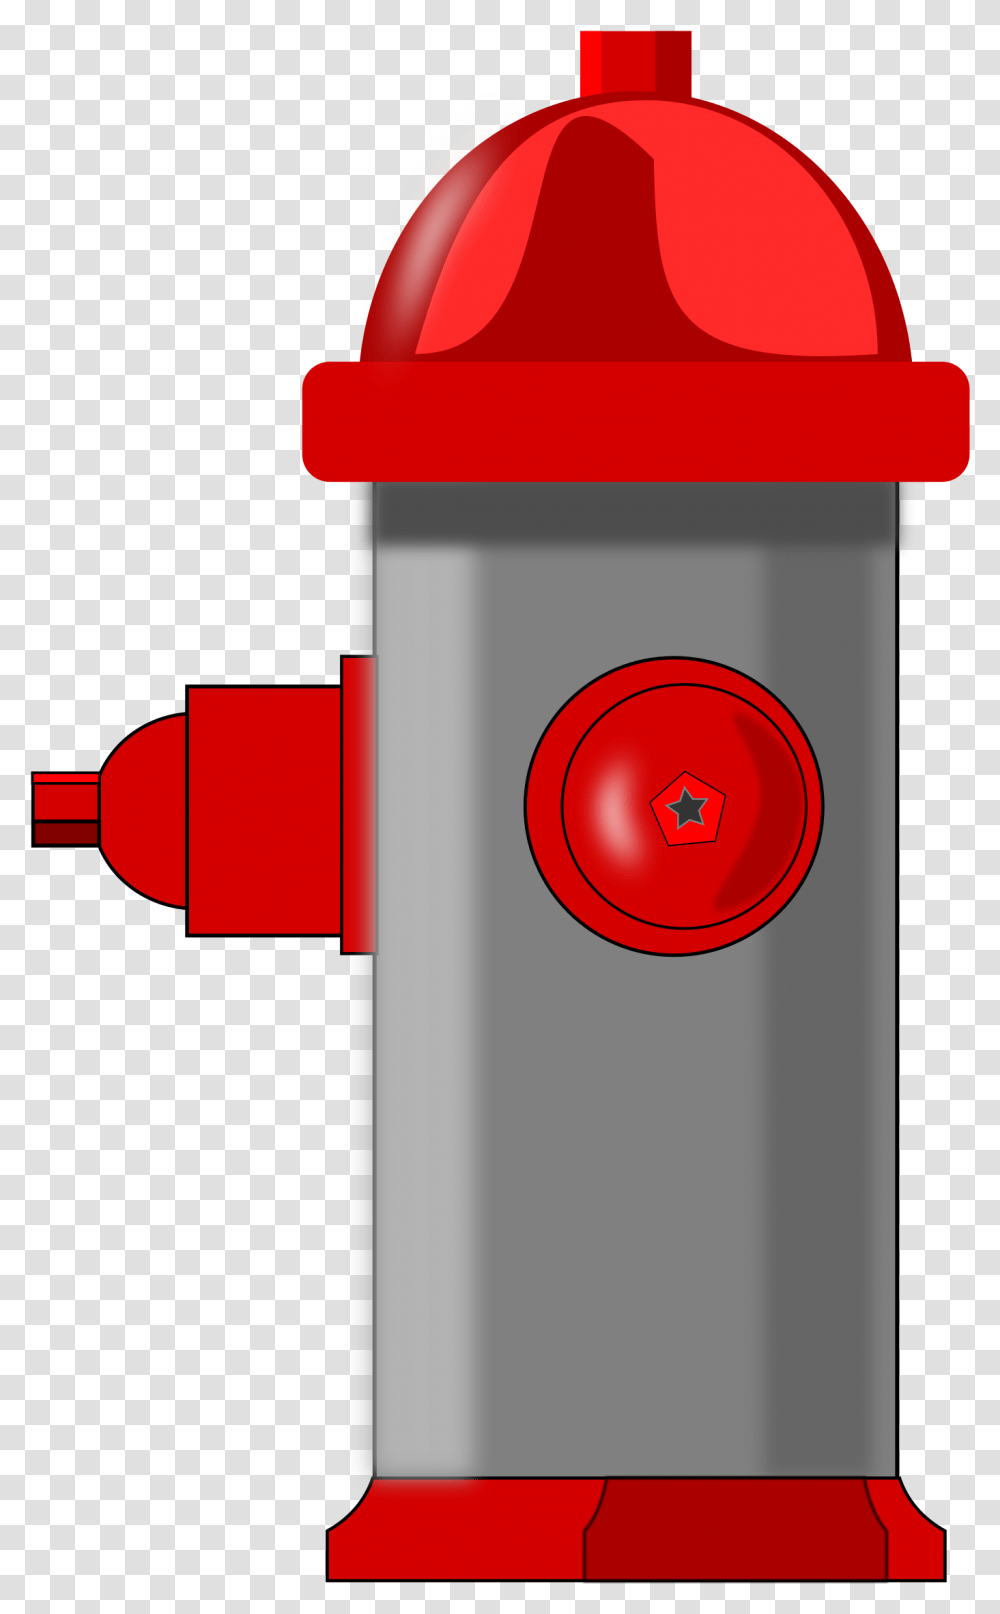 Fire Hydrant Image Hydrant Fire Hydrant Clip Art, Gas Pump, Machine, Mailbox, Letterbox Transparent Png